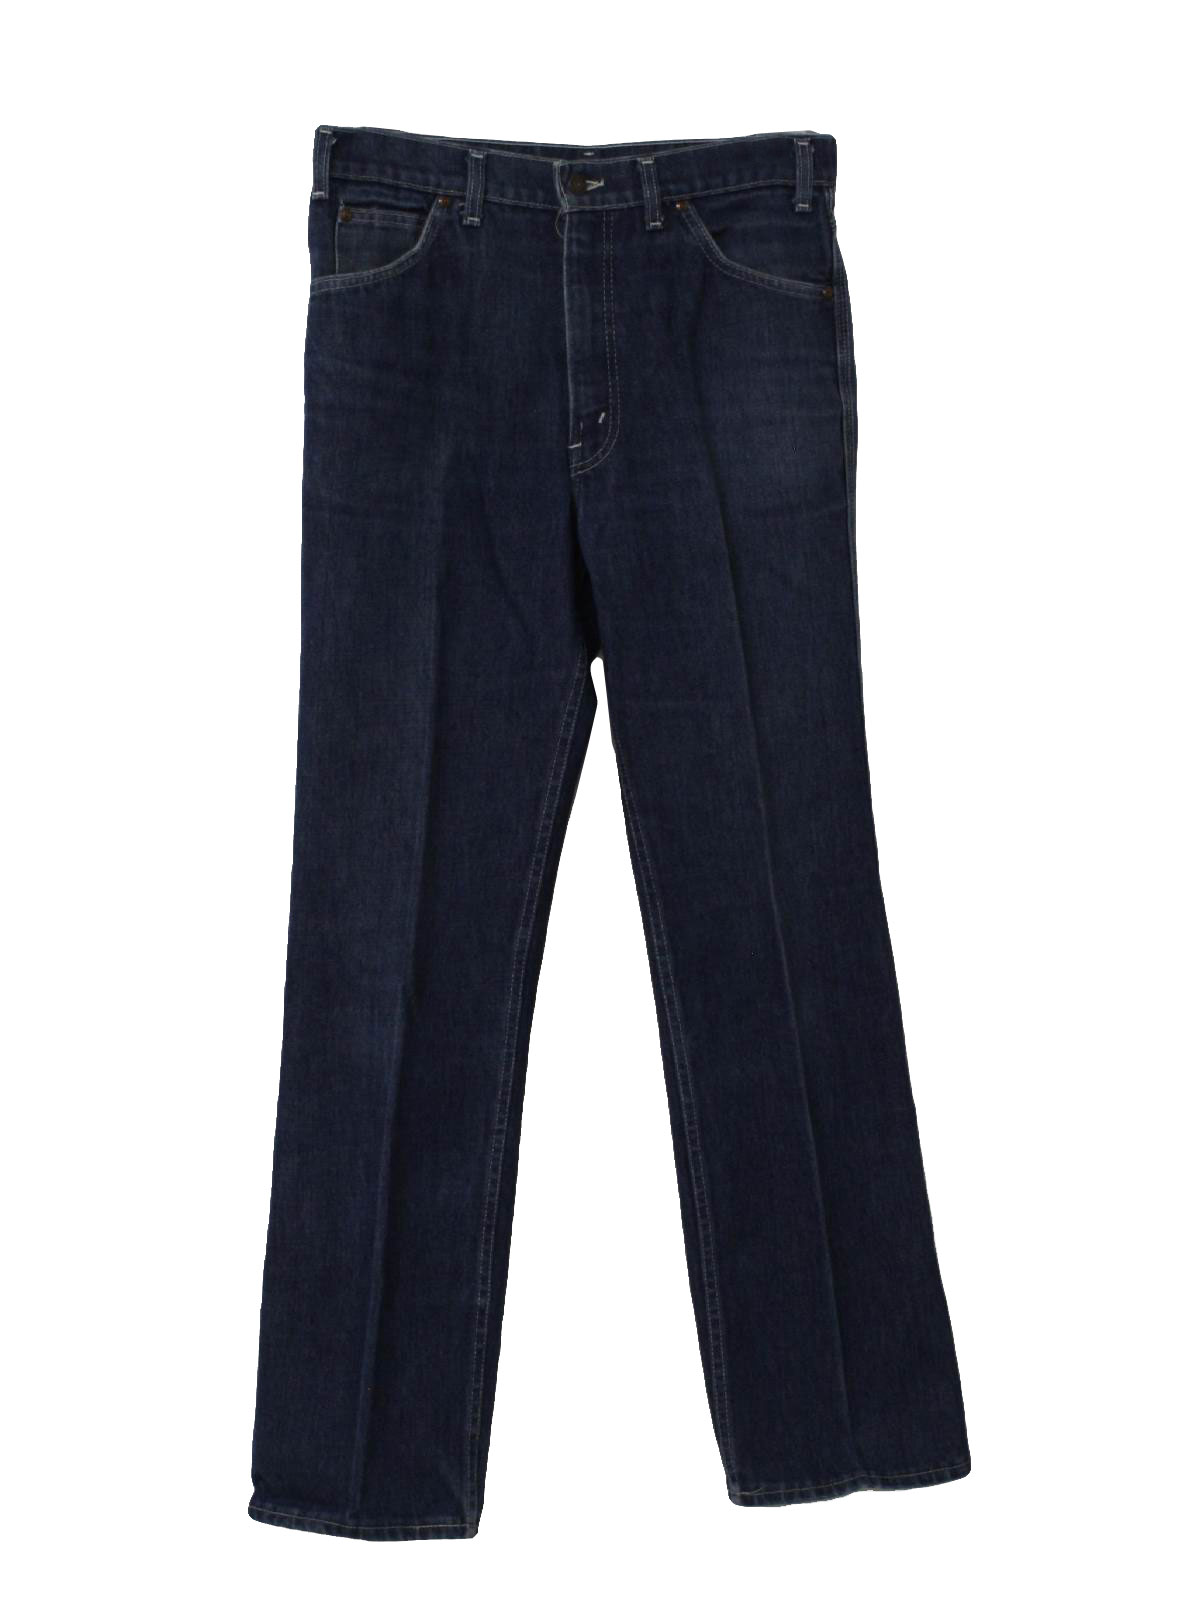 Vintage LEVIS Movin on Seventies Pants: Early 70s -LEVIS Movin on- Mens ...